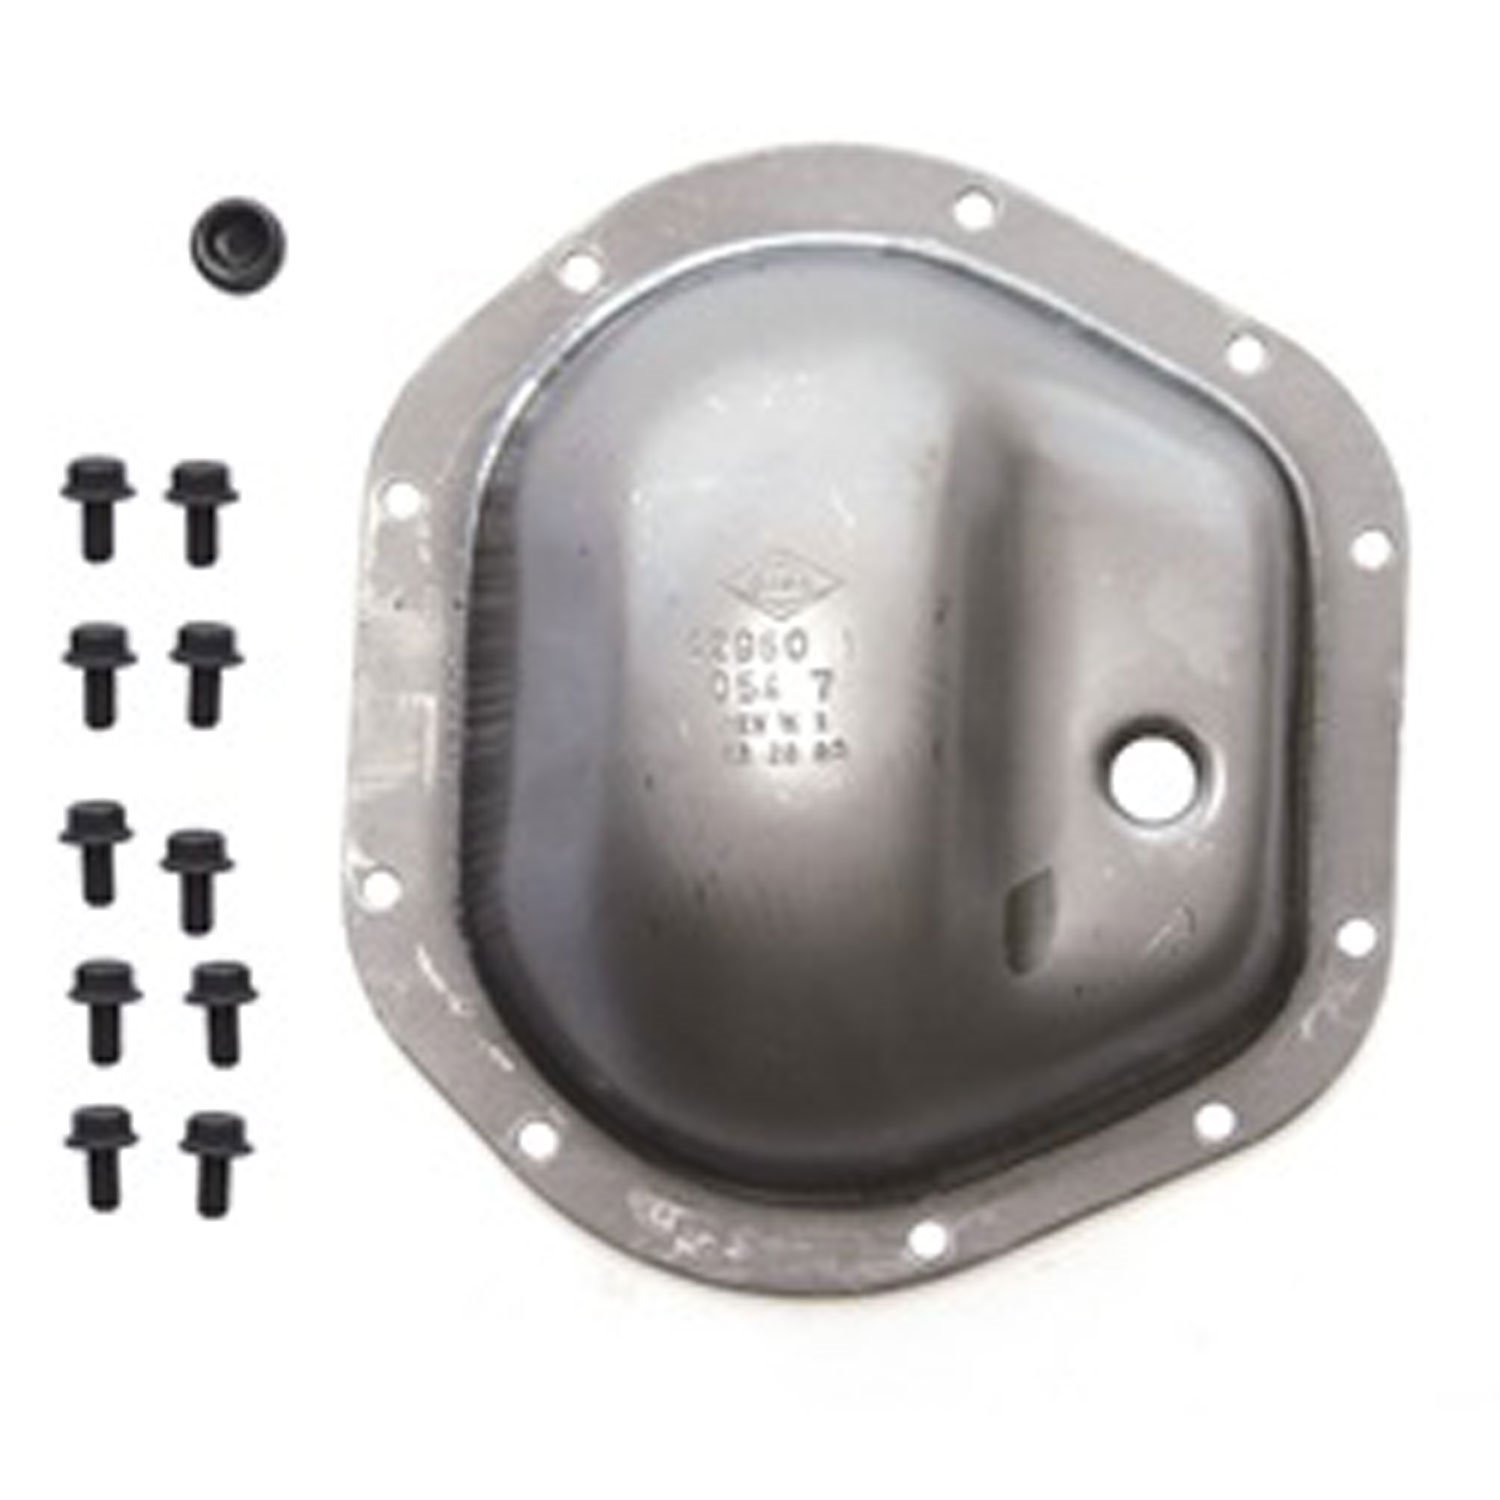 Differential Cover Kit for d44 rear Includes Cover and Bolts 72-83 CJ5 72-75 CJ6 86 CJ7 87-11 Wrangler 93-98 Grand Cherokee